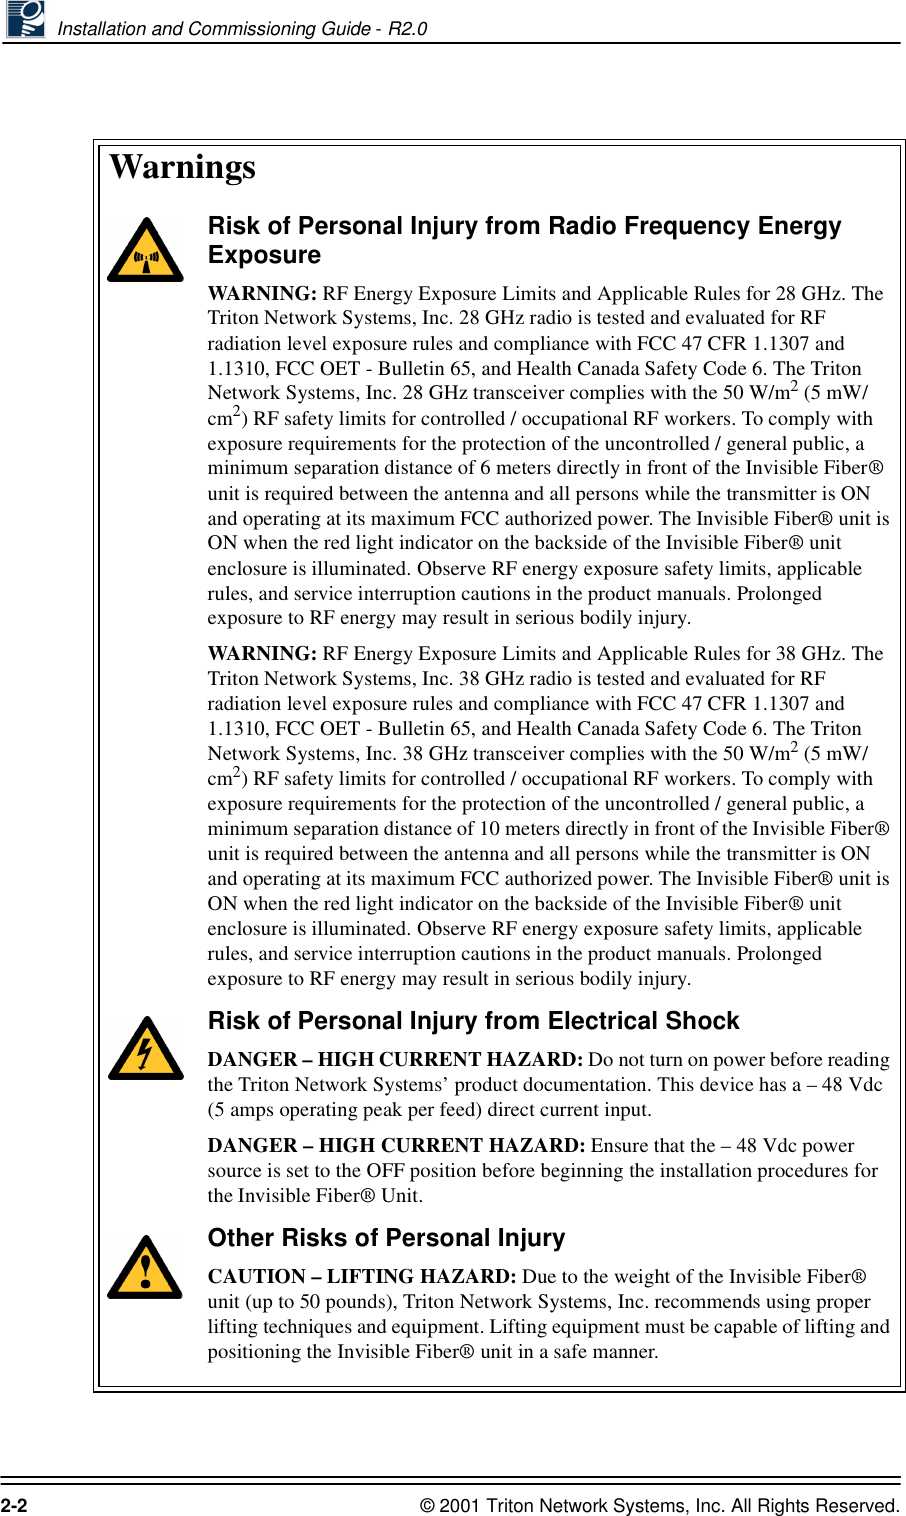  Installation and Commissioning Guide - R2.02-2 © 2001 Triton Network Systems, Inc. All Rights Reserved.WarningsRisk of Personal Injury from Radio Frequency Energy ExposureWARNING: RF Energy Exposure Limits and Applicable Rules for 28 GHz. The Triton Network Systems, Inc. 28 GHz radio is tested and evaluated for RF radiation level exposure rules and compliance with FCC 47 CFR 1.1307 and 1.1310, FCC OET - Bulletin 65, and Health Canada Safety Code 6. The Triton Network Systems, Inc. 28 GHz transceiver complies with the 50 W/m2 (5 mW/cm2) RF safety limits for controlled / occupational RF workers. To comply with exposure requirements for the protection of the uncontrolled / general public, a minimum separation distance of 6 meters directly in front of the Invisible Fiber® unit is required between the antenna and all persons while the transmitter is ON and operating at its maximum FCC authorized power. The Invisible Fiber® unit is ON when the red light indicator on the backside of the Invisible Fiber® unit enclosure is illuminated. Observe RF energy exposure safety limits, applicable rules, and service interruption cautions in the product manuals. Prolonged exposure to RF energy may result in serious bodily injury.WARNING: RF Energy Exposure Limits and Applicable Rules for 38 GHz. The Triton Network Systems, Inc. 38 GHz radio is tested and evaluated for RF radiation level exposure rules and compliance with FCC 47 CFR 1.1307 and 1.1310, FCC OET - Bulletin 65, and Health Canada Safety Code 6. The Triton Network Systems, Inc. 38 GHz transceiver complies with the 50 W/m2 (5 mW/cm2) RF safety limits for controlled / occupational RF workers. To comply with exposure requirements for the protection of the uncontrolled / general public, a minimum separation distance of 10 meters directly in front of the Invisible Fiber® unit is required between the antenna and all persons while the transmitter is ON and operating at its maximum FCC authorized power. The Invisible Fiber® unit is ON when the red light indicator on the backside of the Invisible Fiber® unit enclosure is illuminated. Observe RF energy exposure safety limits, applicable rules, and service interruption cautions in the product manuals. Prolonged exposure to RF energy may result in serious bodily injury.Risk of Personal Injury from Electrical ShockDANGER – HIGH CURRENT HAZARD: Do not turn on power before reading the Triton Network Systems’ product documentation. This device has a – 48 Vdc (5 amps operating peak per feed) direct current input.DANGER – HIGH CURRENT HAZARD: Ensure that the – 48 Vdc power source is set to the OFF position before beginning the installation procedures for the Invisible Fiber® Unit. Other Risks of Personal InjuryCAUTION – LIFTING HAZARD: Due to the weight of the Invisible Fiber® unit (up to 50 pounds), Triton Network Systems, Inc. recommends using proper lifting techniques and equipment. Lifting equipment must be capable of lifting and positioning the Invisible Fiber® unit in a safe manner.